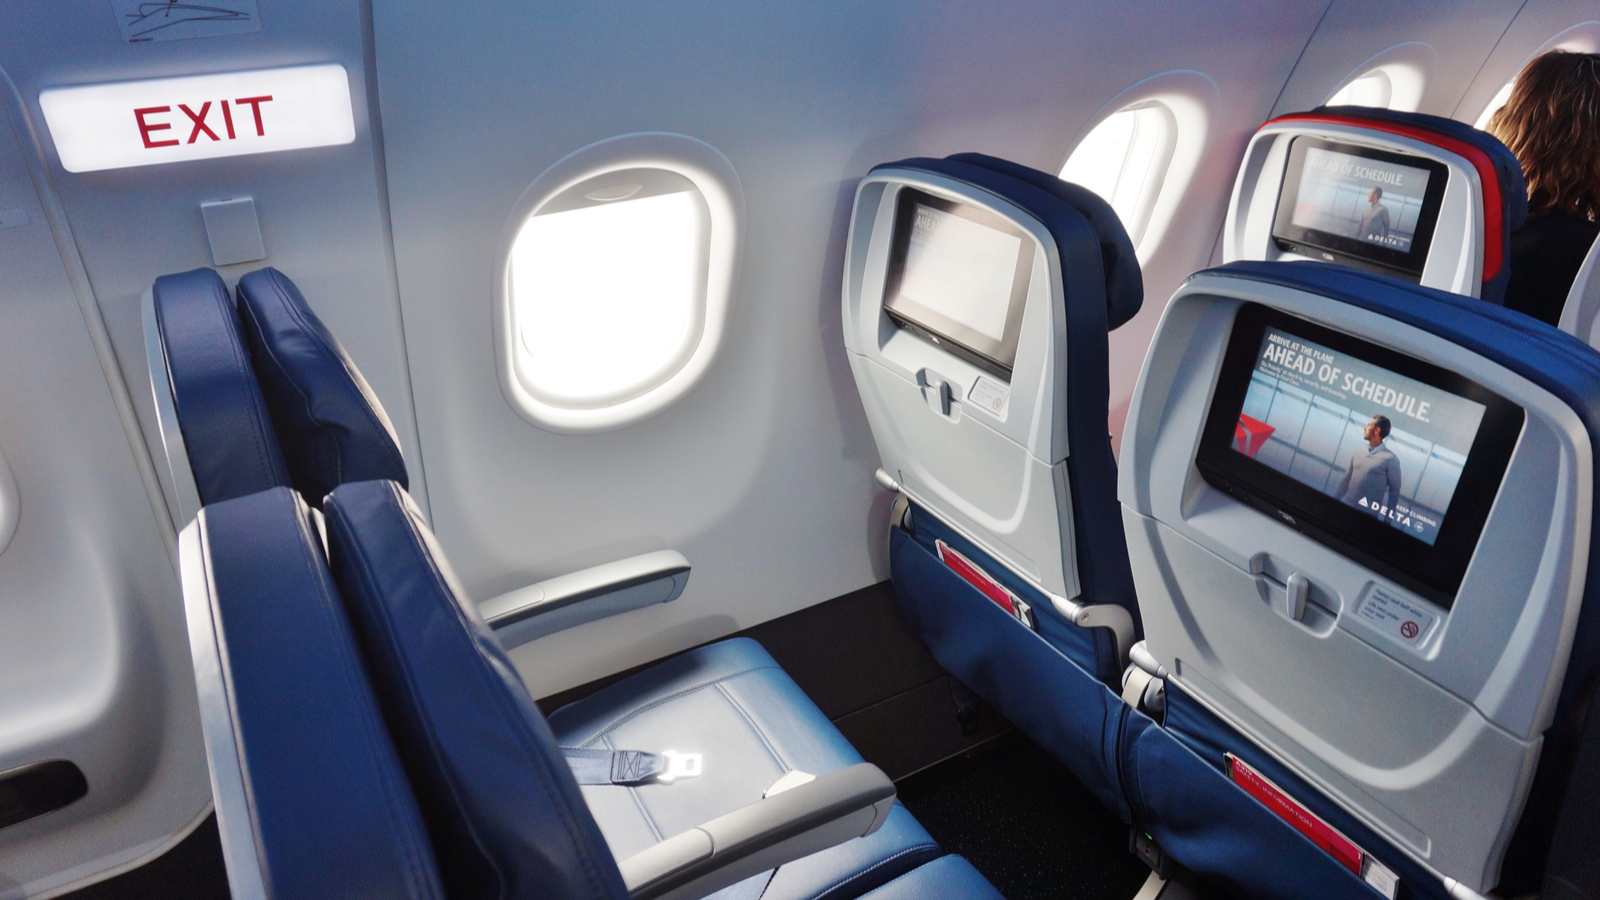 Inside the airplane cabin of a Delta flight representing airline stocks.